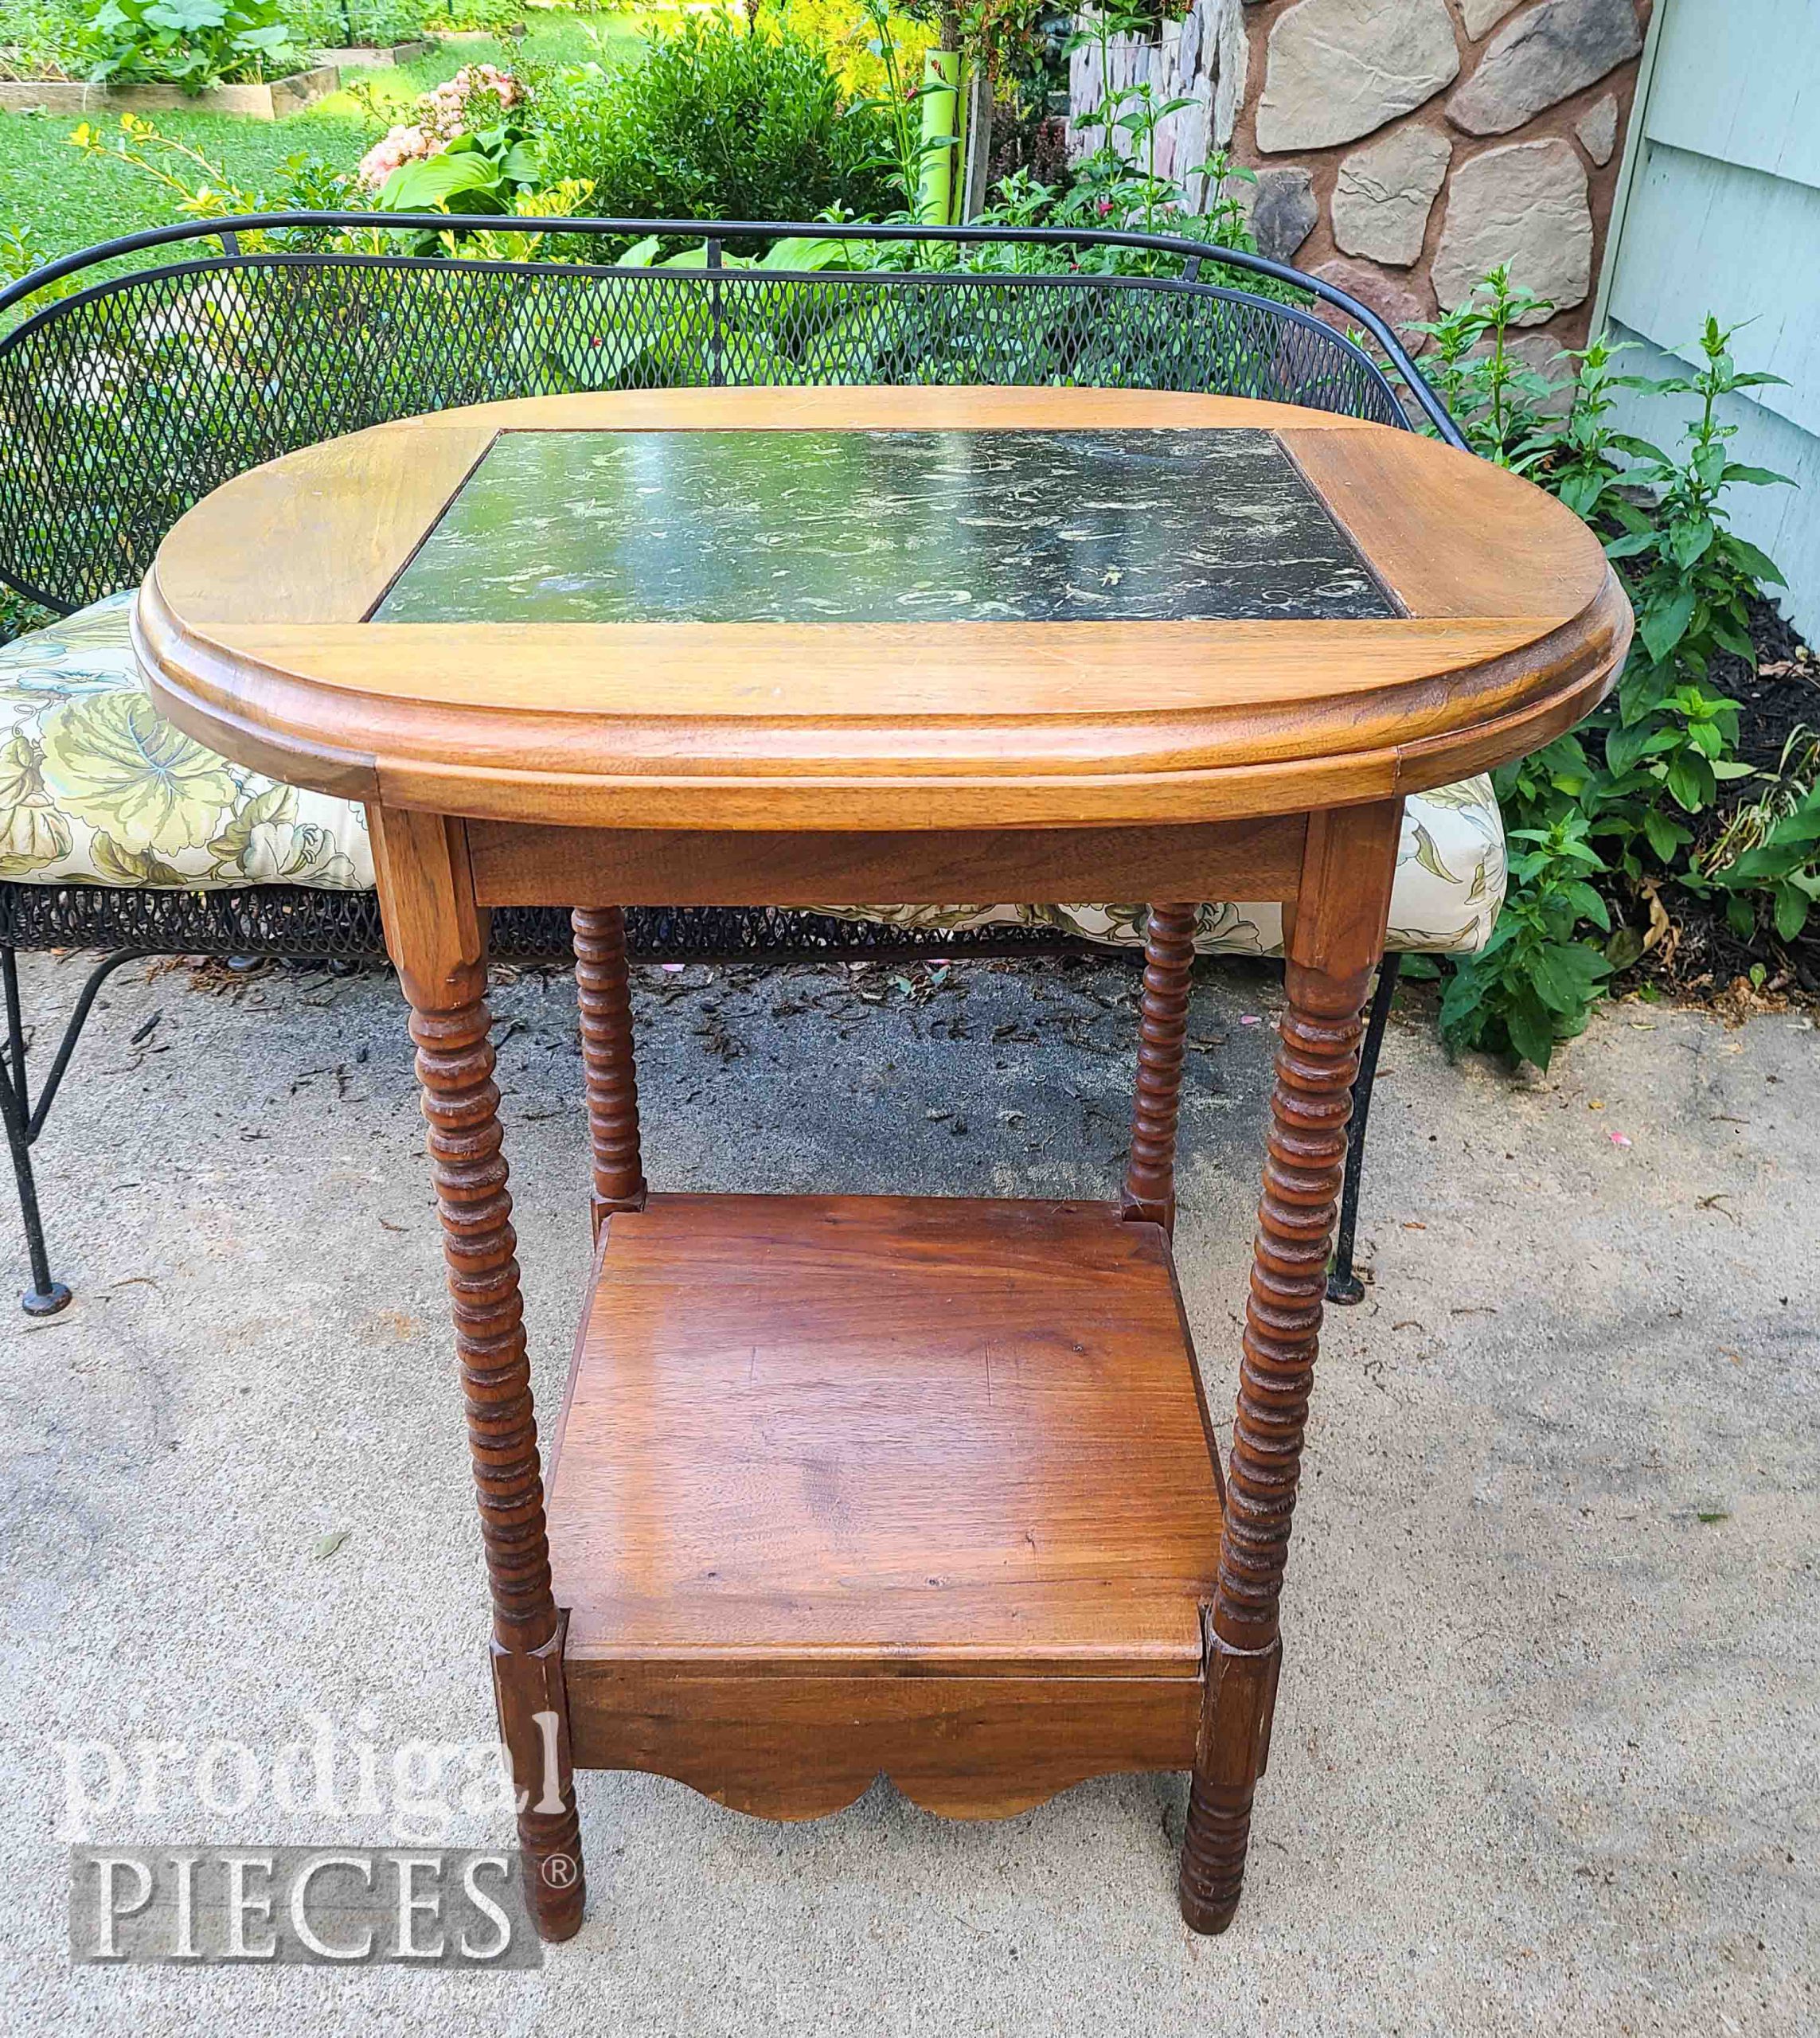 Inlaid Marble Table Before Makeover by Larissa of Prodigal Pieces | prodigalpieces.com #prodigalpieces